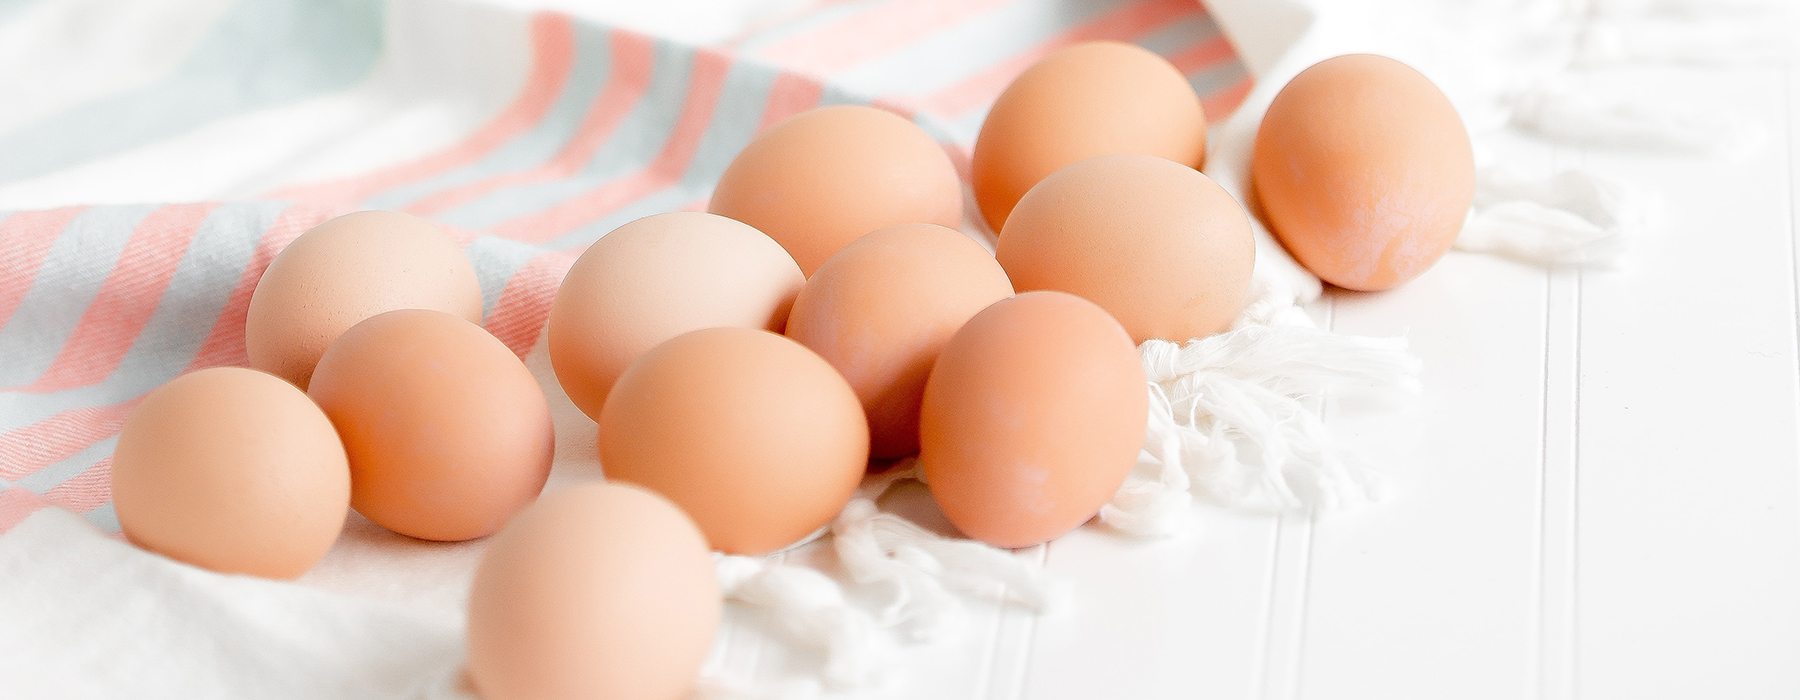 Eggs on a blue and pink striped tablecloth.